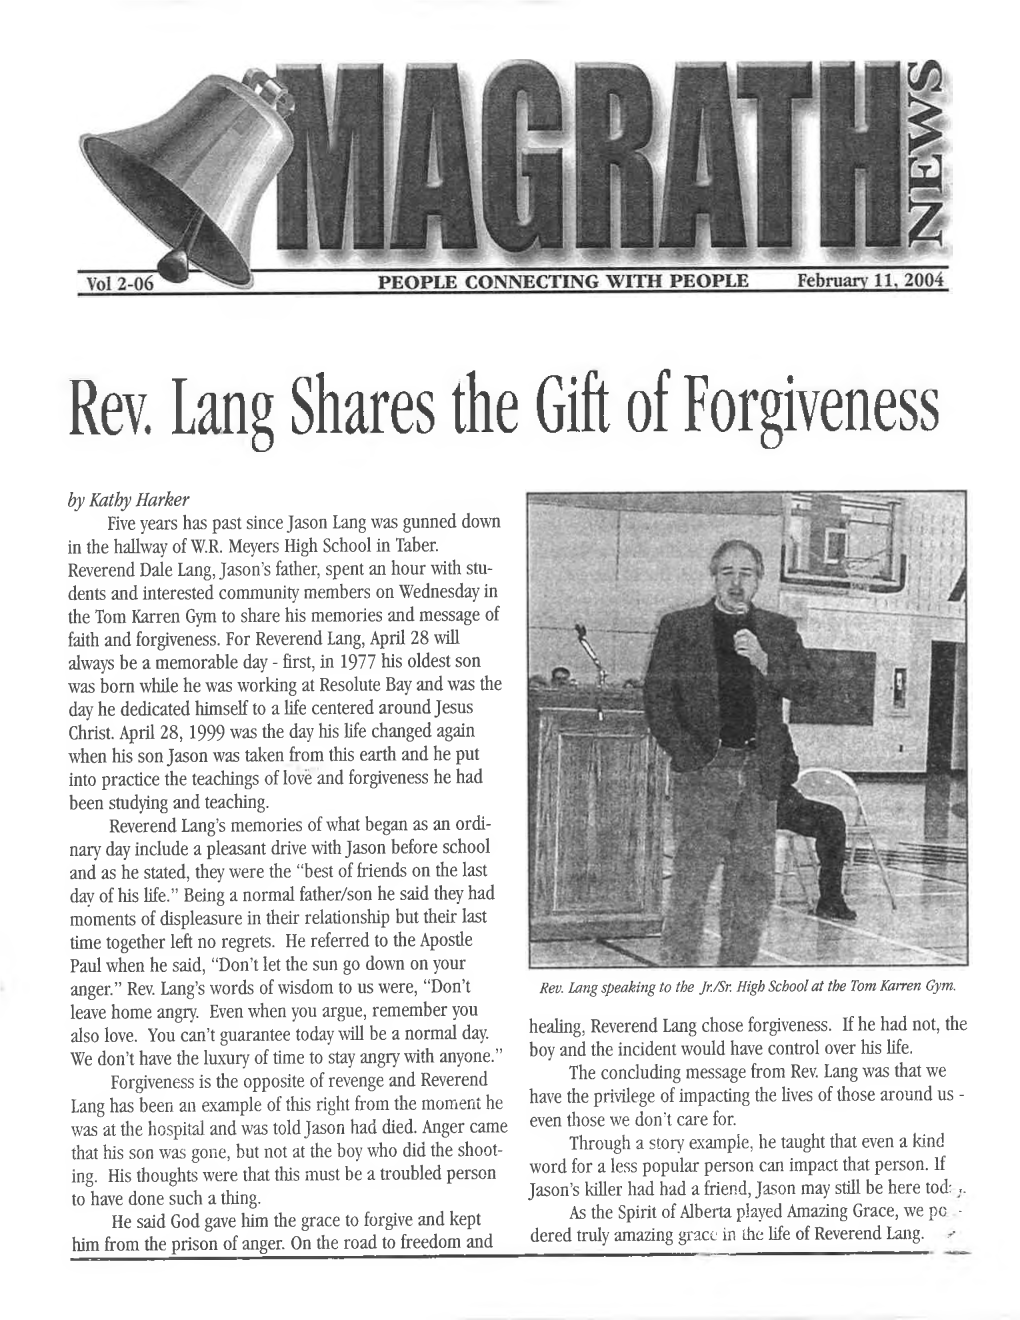 Rev. Lang Shares the Gift of Forgiveness by Kathy Harker Five Years Has Past Since Jason Lang Was Gunned Down in the Hallway of W.R